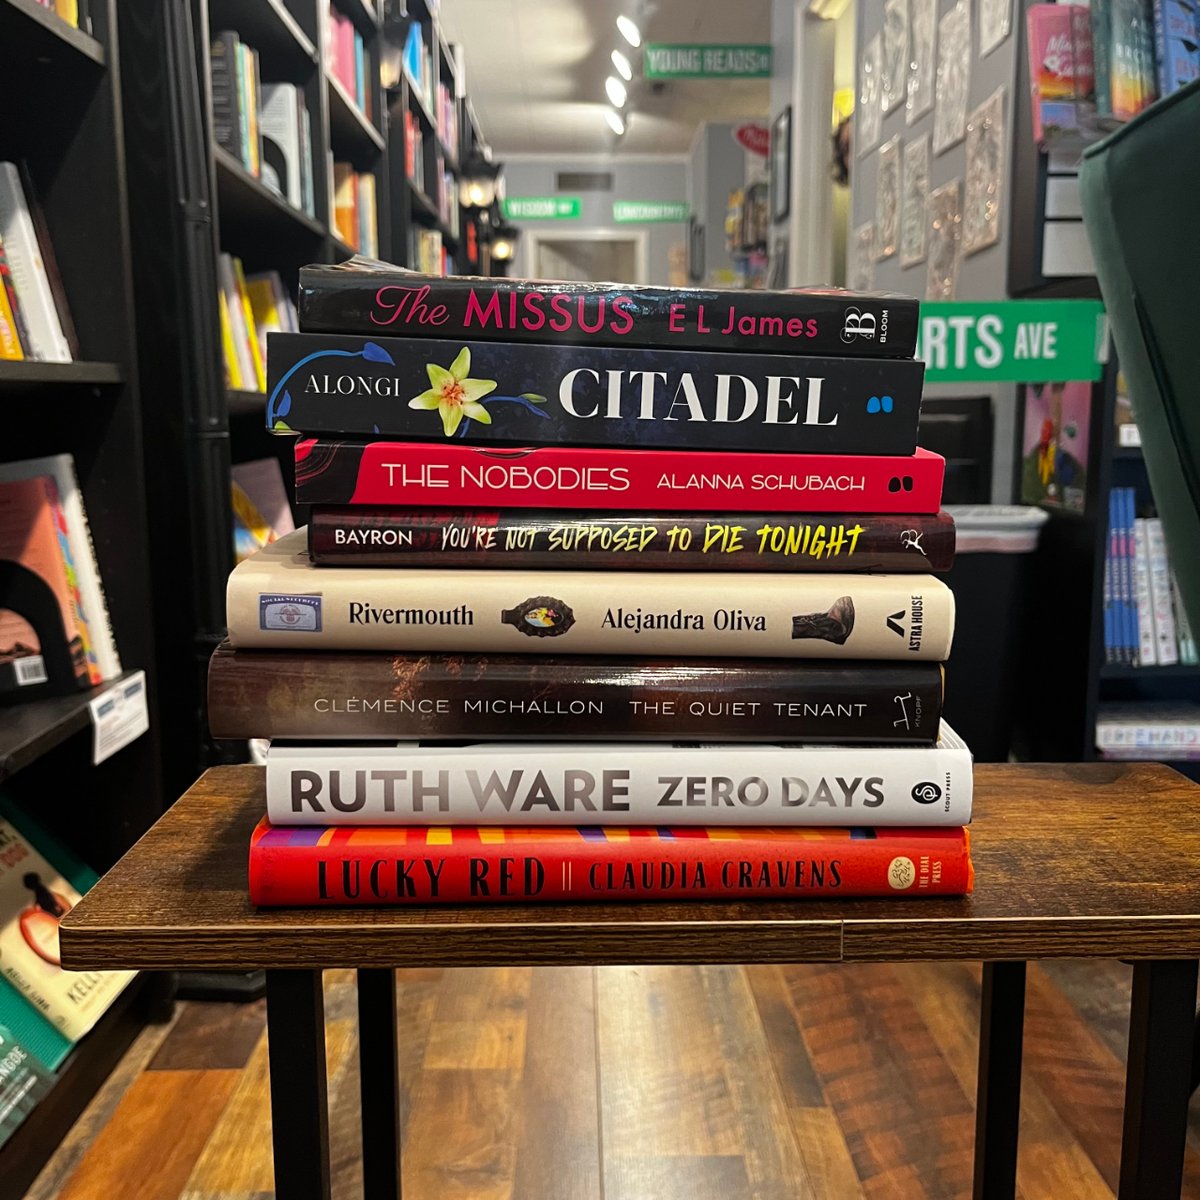 🚨NEW BOOK TUESDAY🚨 Come visit us and grab Ruth Ware's newest book! 📚 For fans of E.L. James her new book, sequel to The Mister is out now! We can also order any you need in!
#newbooktuesday #ruthware #mainstreetreads #booknerd #indiebookstore #zerodays 
mainstreetreads.com